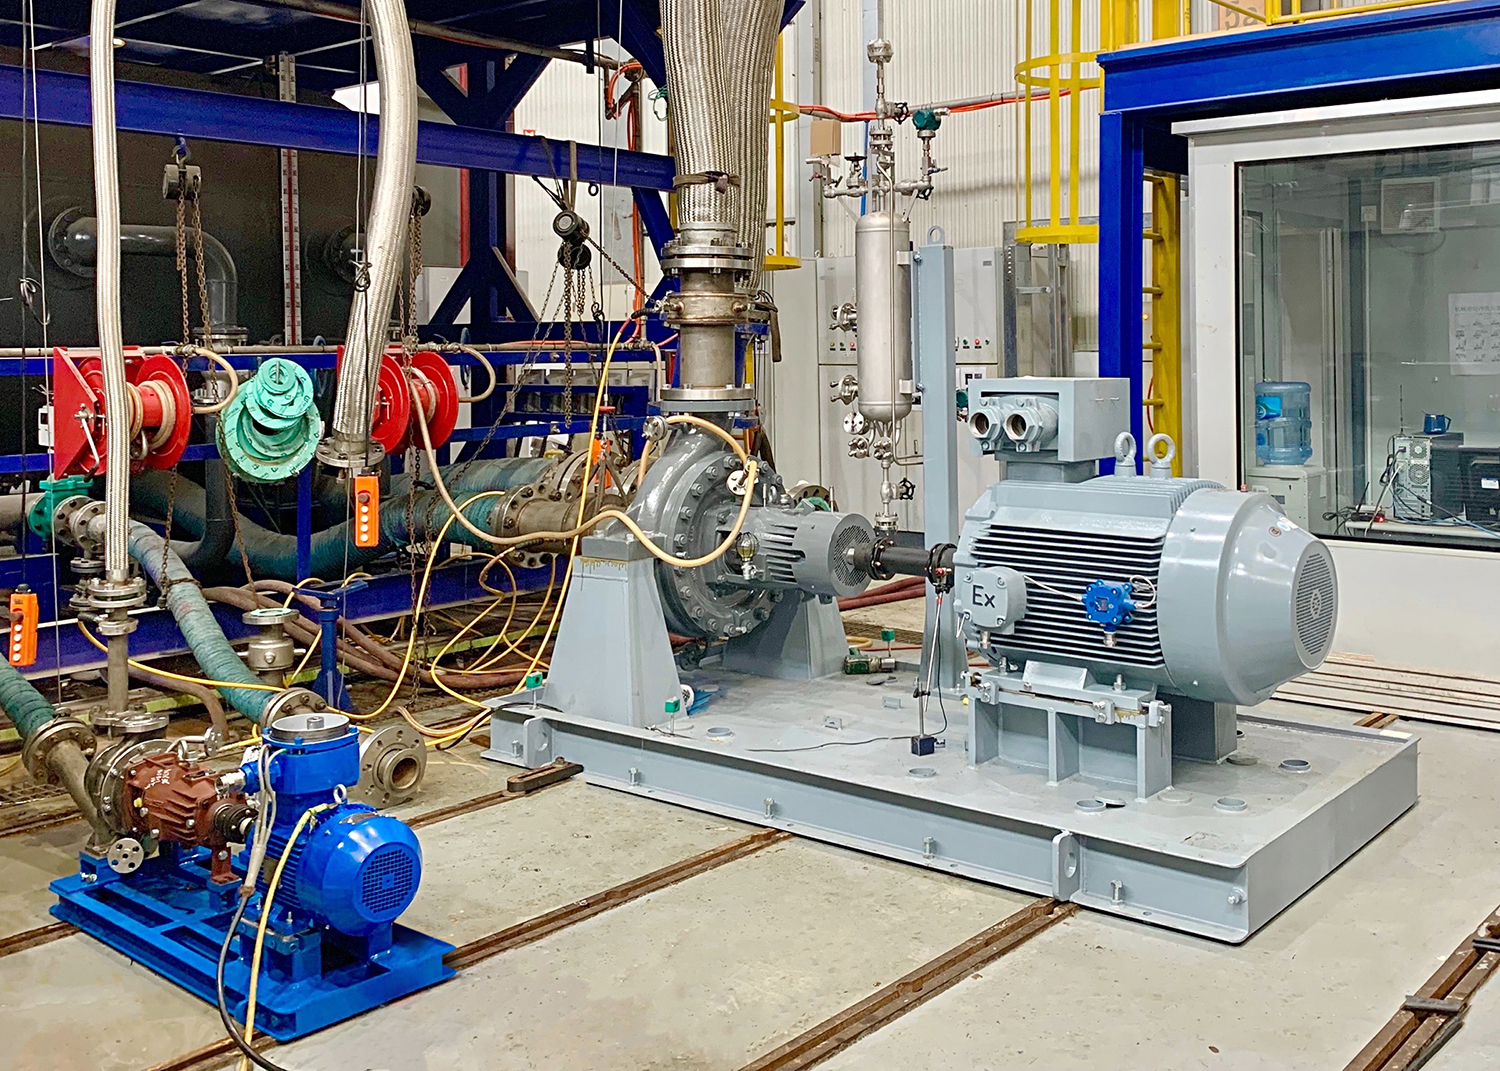 Design and manufacturing of the 87 pumps is taking place at Sulzer’s facility in Suzhou.